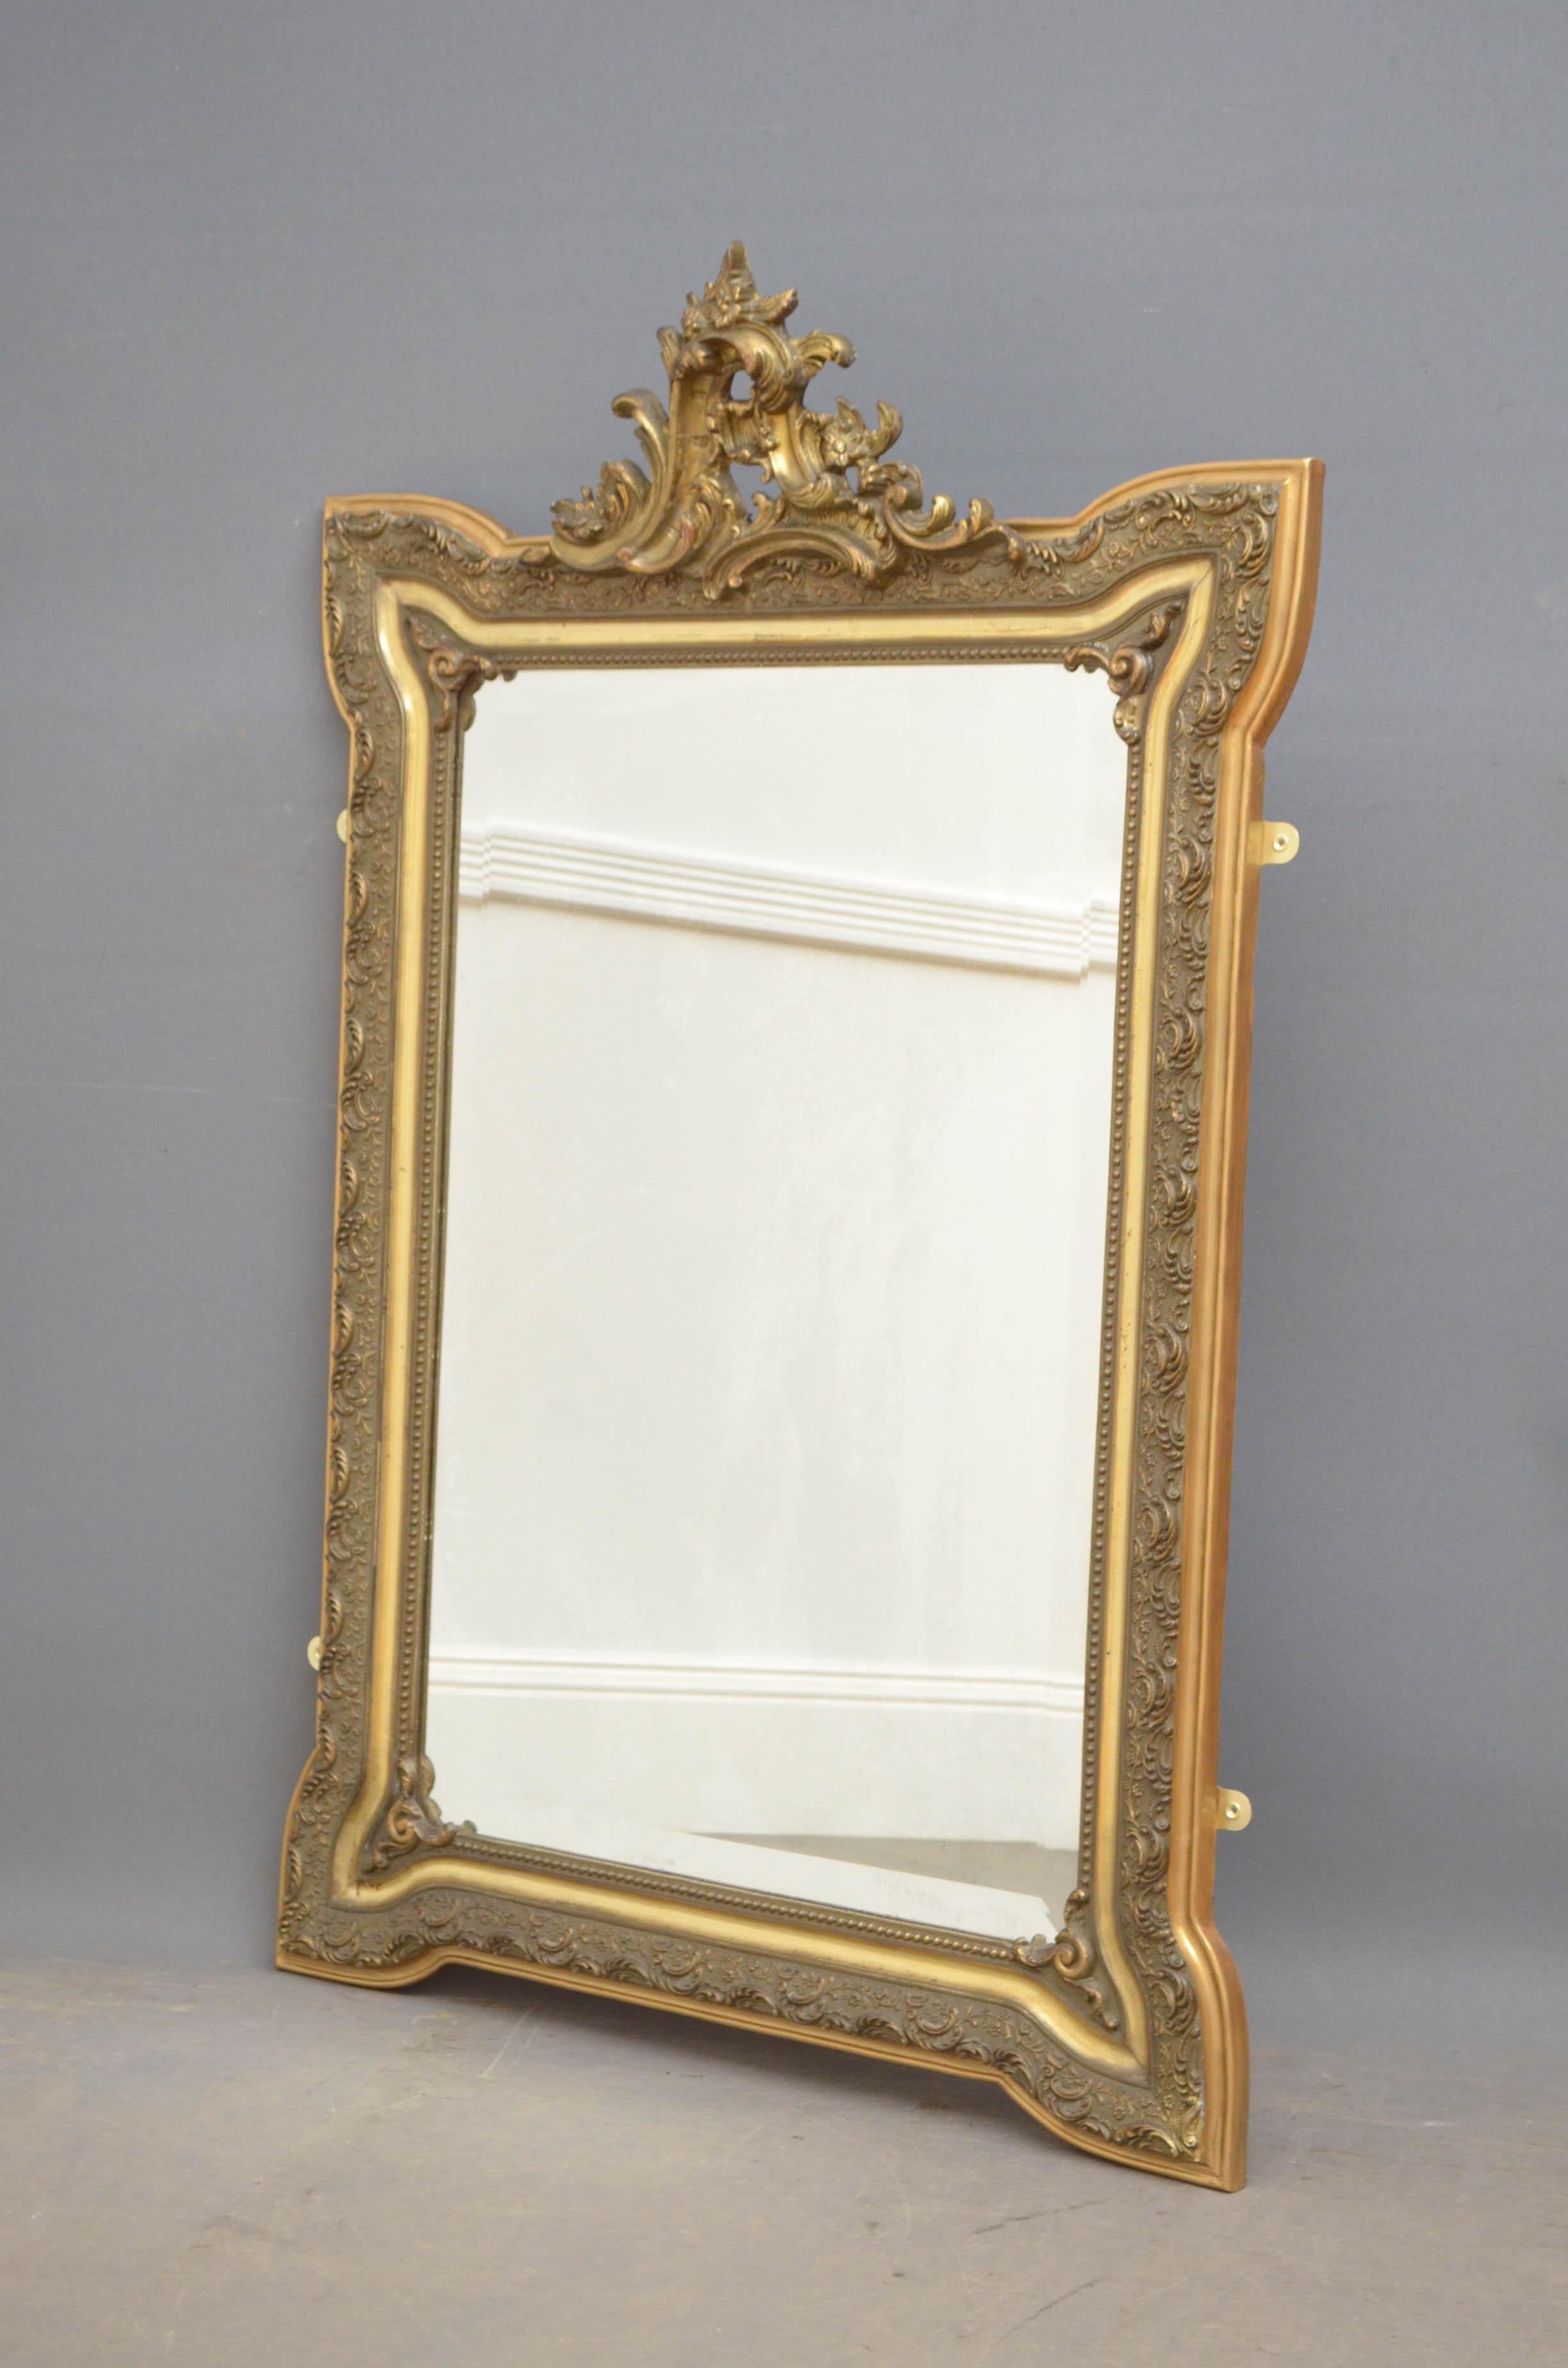 Sn4792 Art Nouveau glided wall mirror, having original bevelled edge, foxed glass in carved and moulded frame with centre crest to the top.

This antique mirror retains its original glass and gilt (with some touching up), it is in excellent home